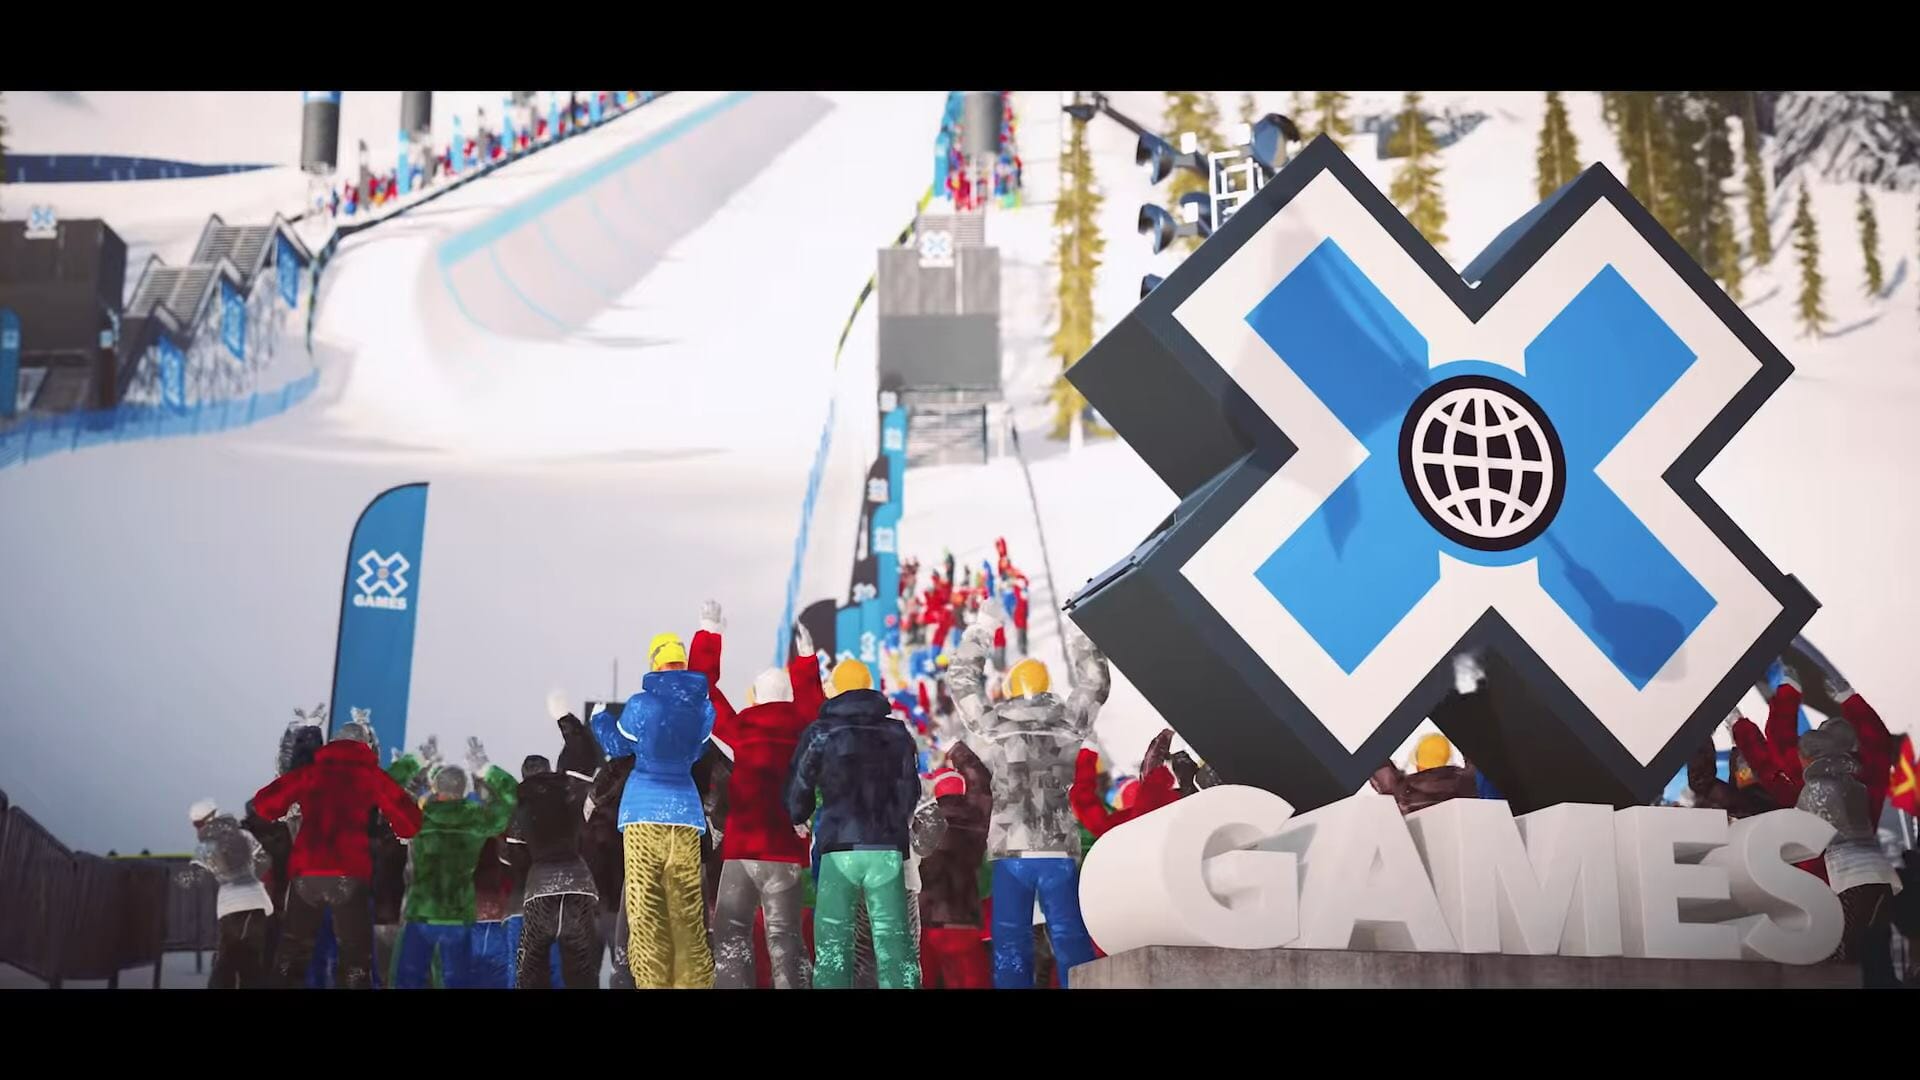 S x games. Steep x games Gold Edition. X games. Start Arch x games.